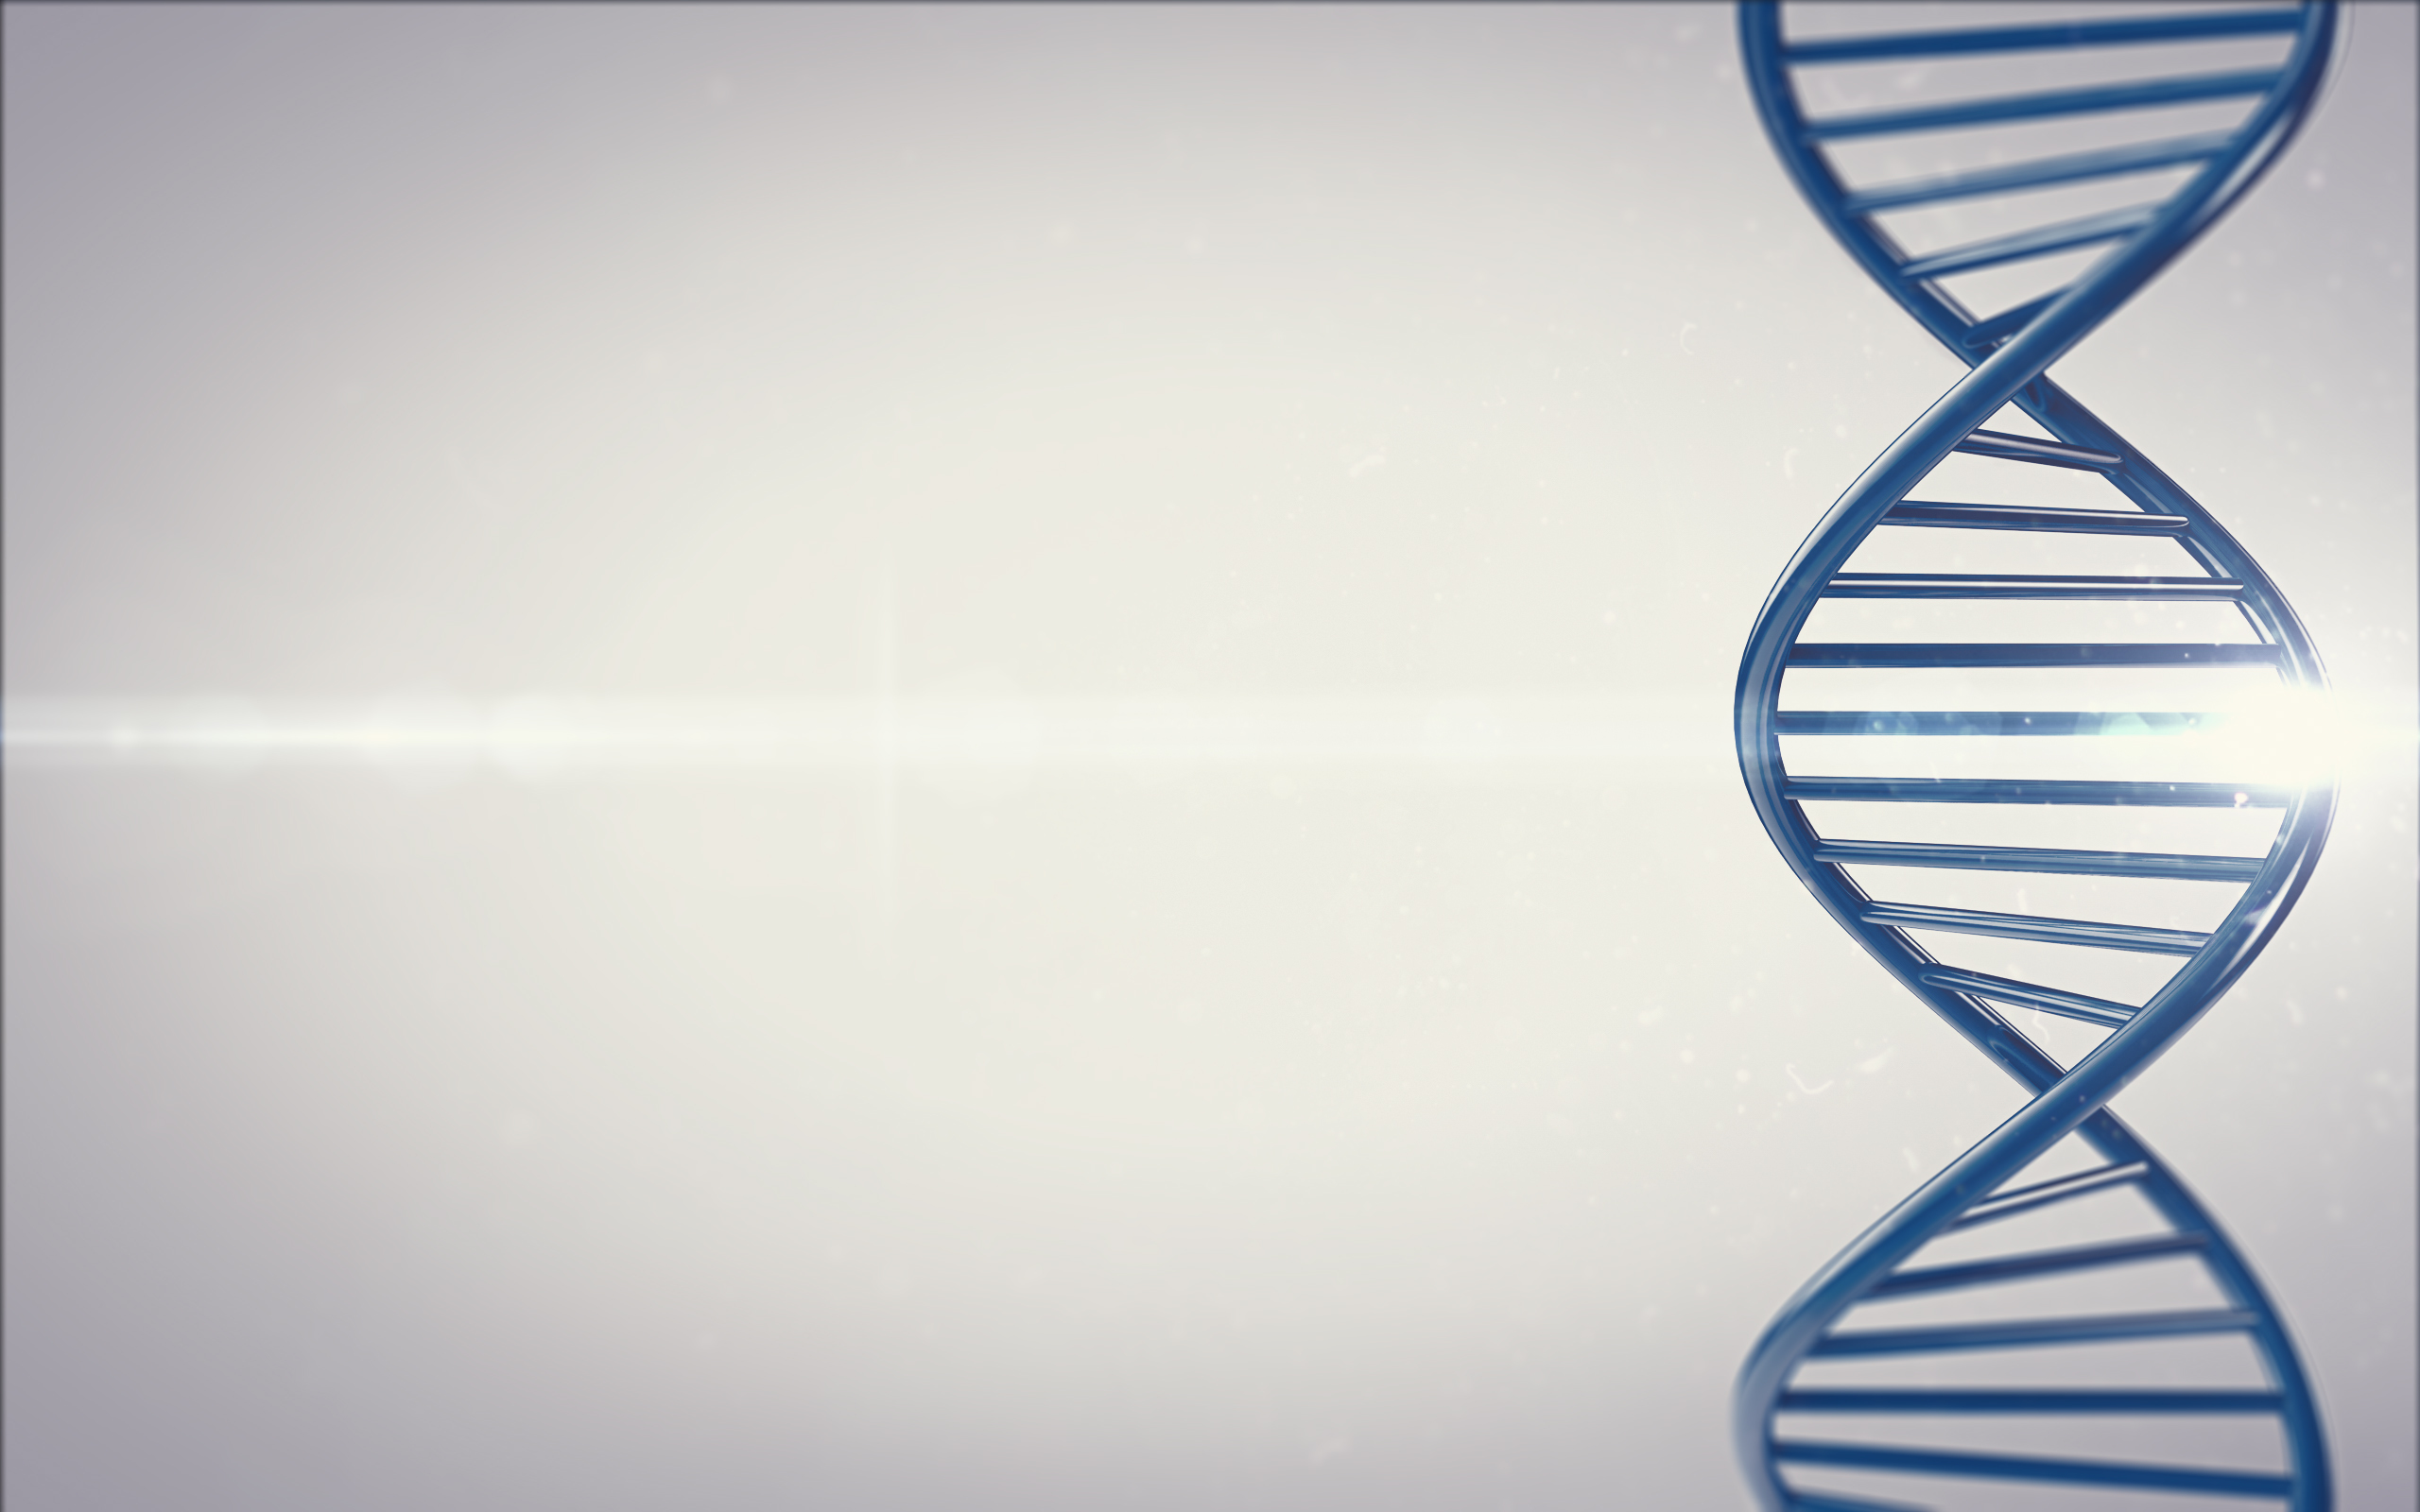 dna-download-backgrounds-for-powerpoint-templates-ppt-backgrounds